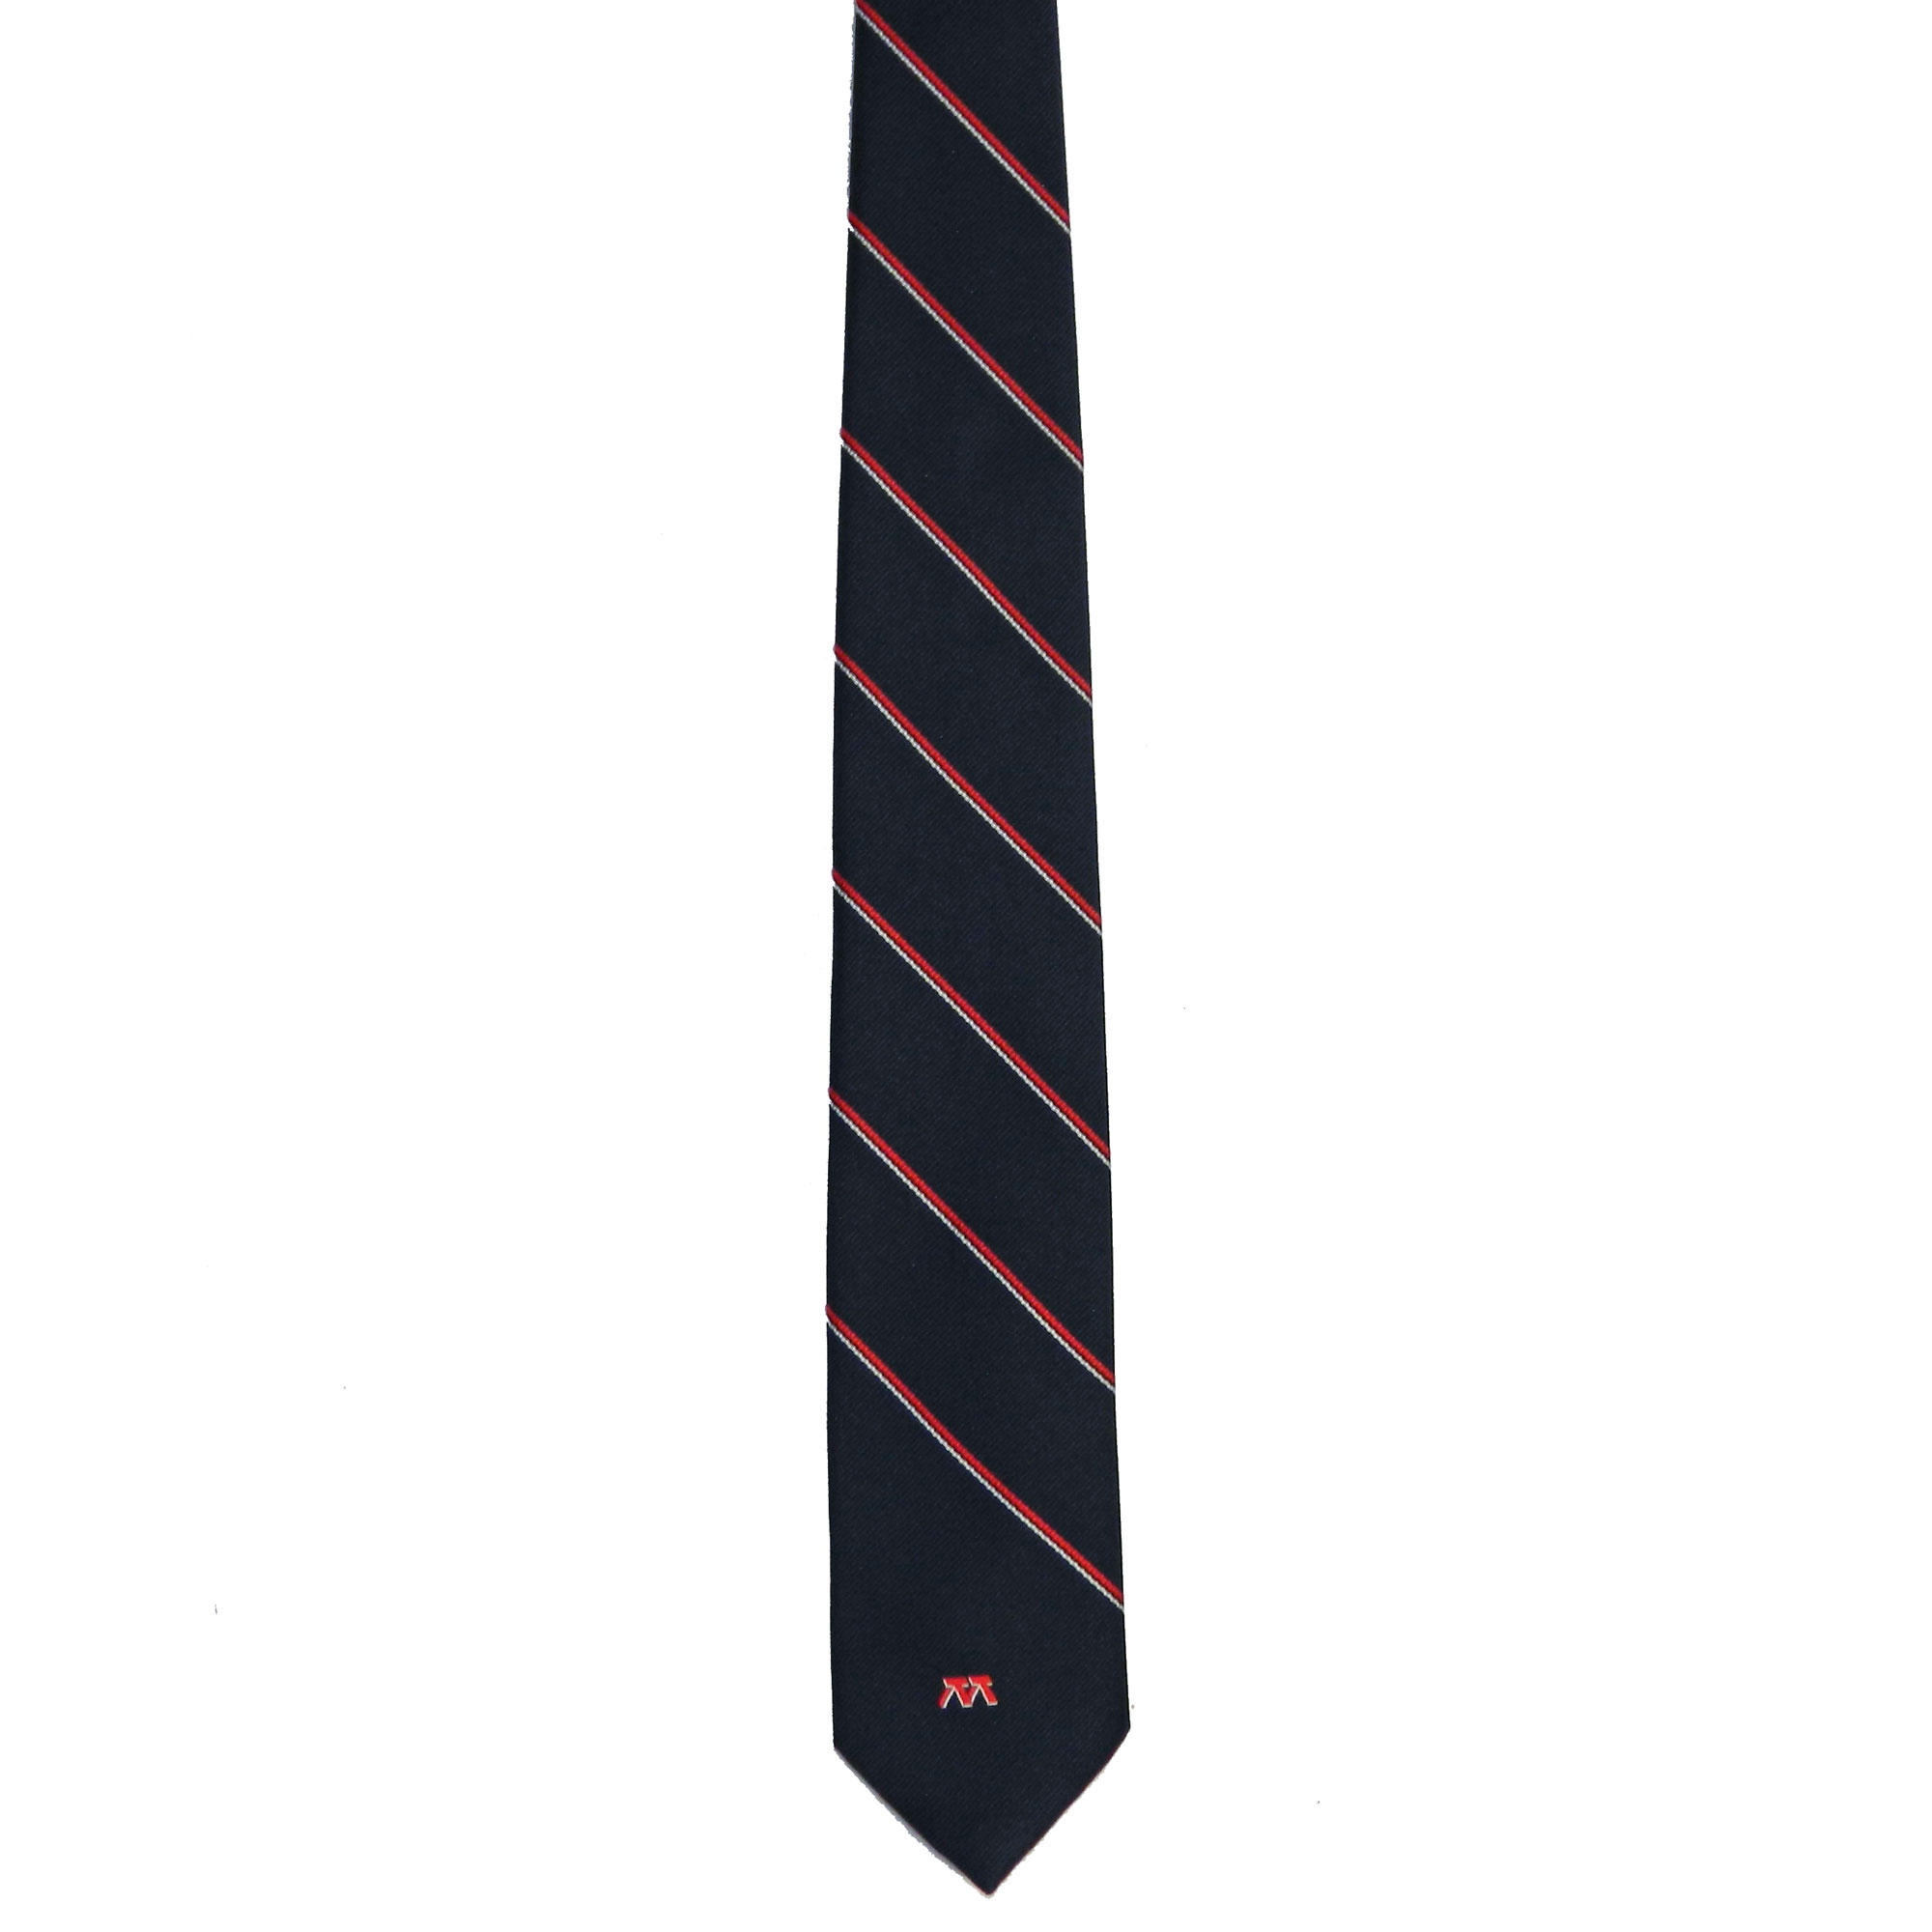 Red white and blue diagonally striped tie